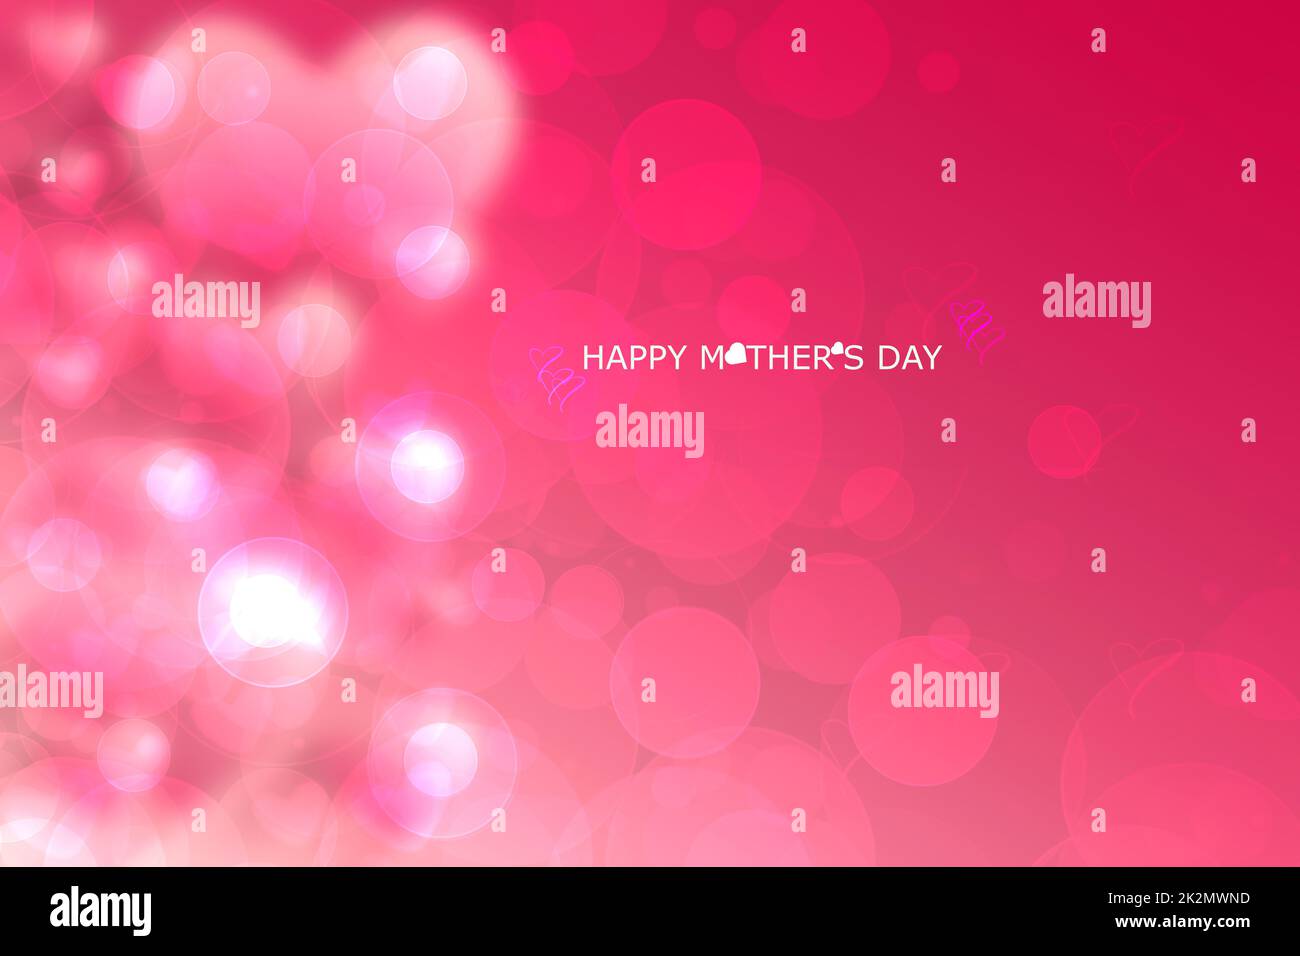 Mothers day greeting card. Abstract festive red magenta bokeh background texture with a Happy mothers day text and hearts. Beautiful illustration of concept of love. Stock Photo